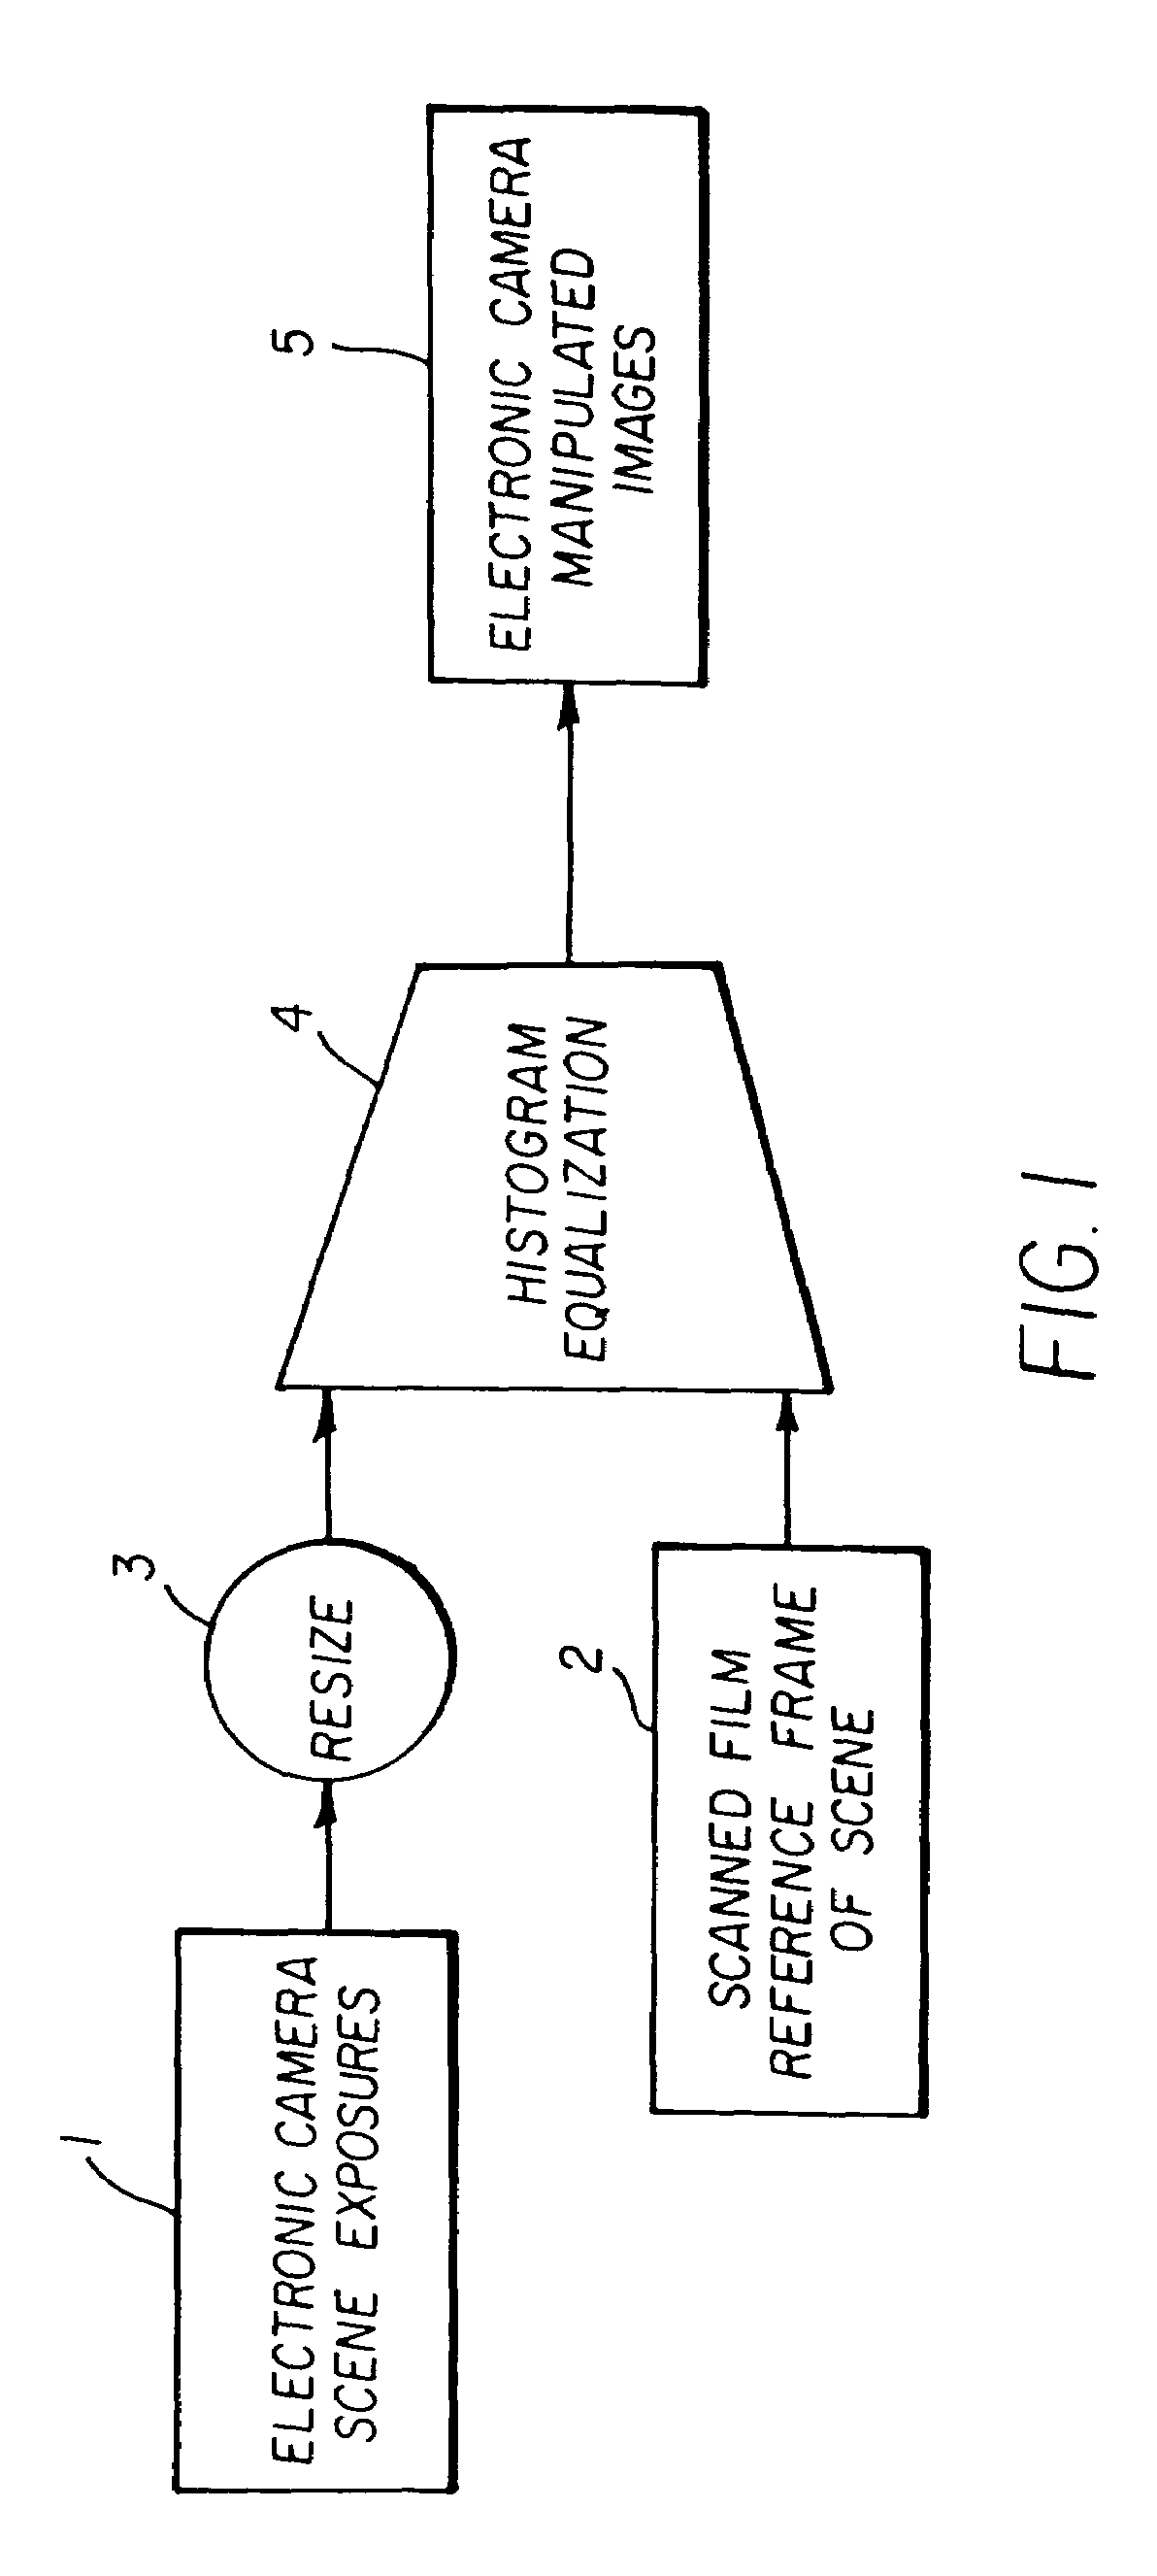 System and method for processing electronically captured images to emulate film tonescale and color